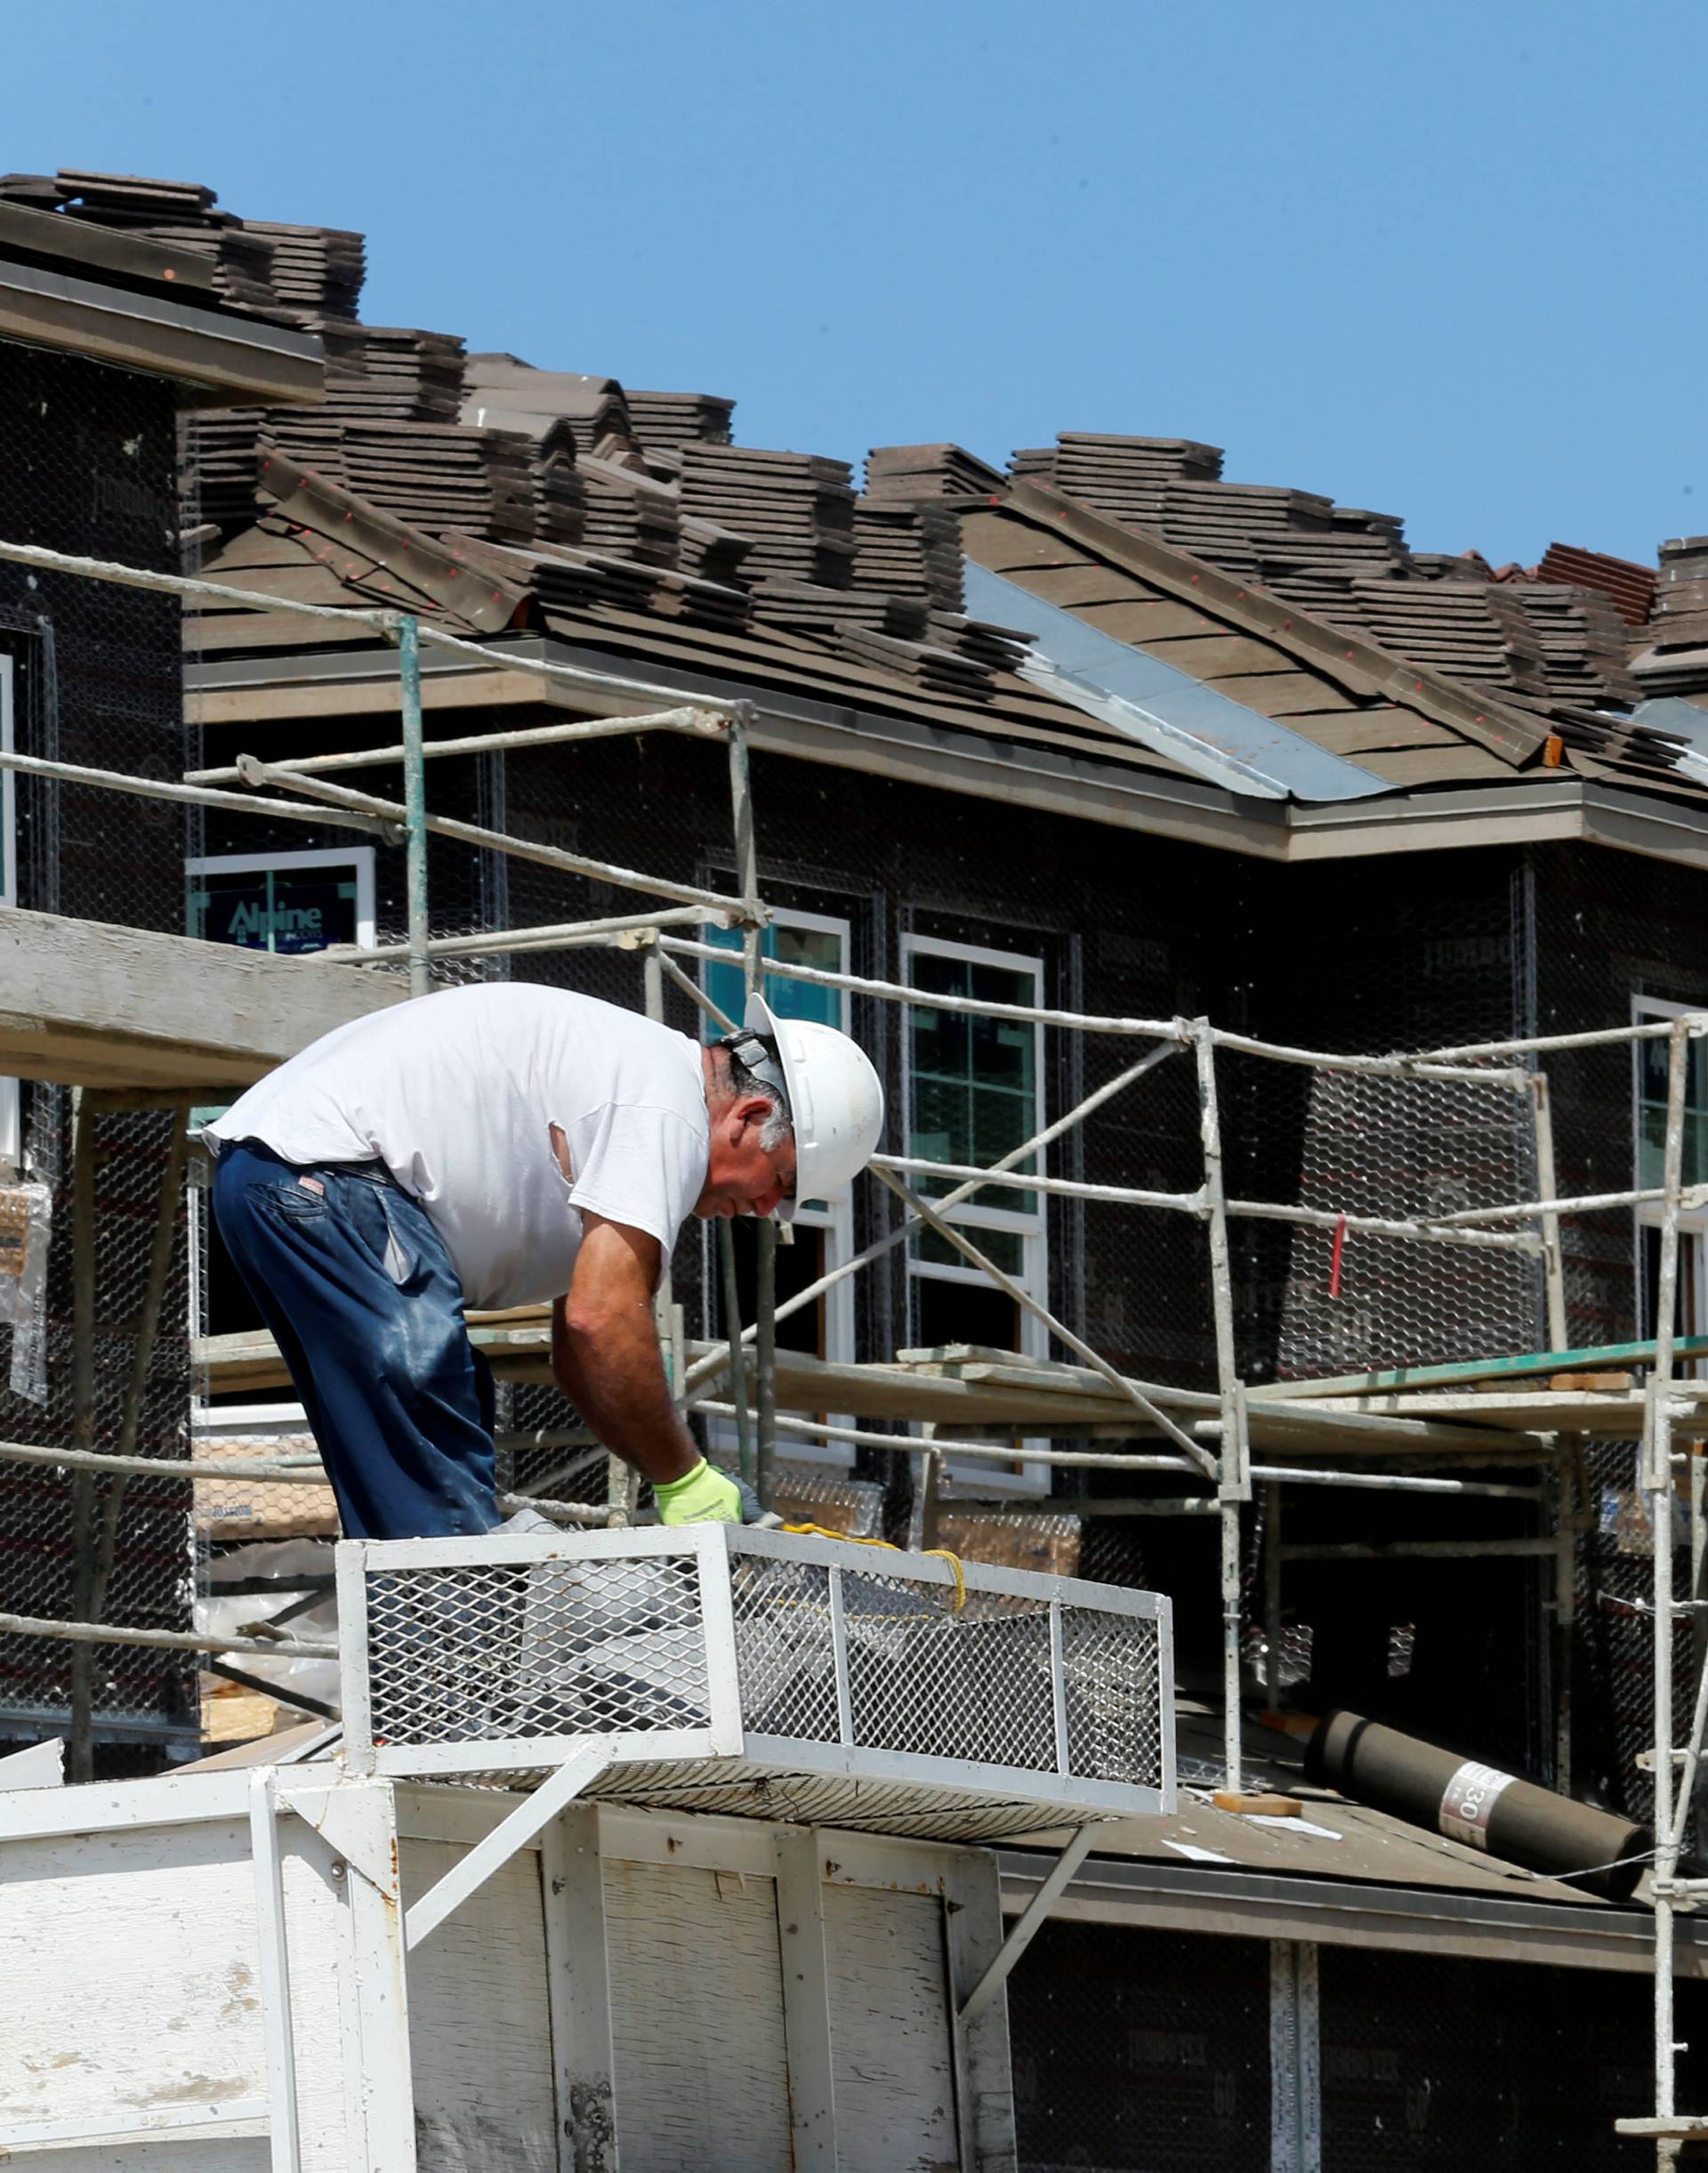 A construction worker is shown building luxury single family homes in Carlsbad, California